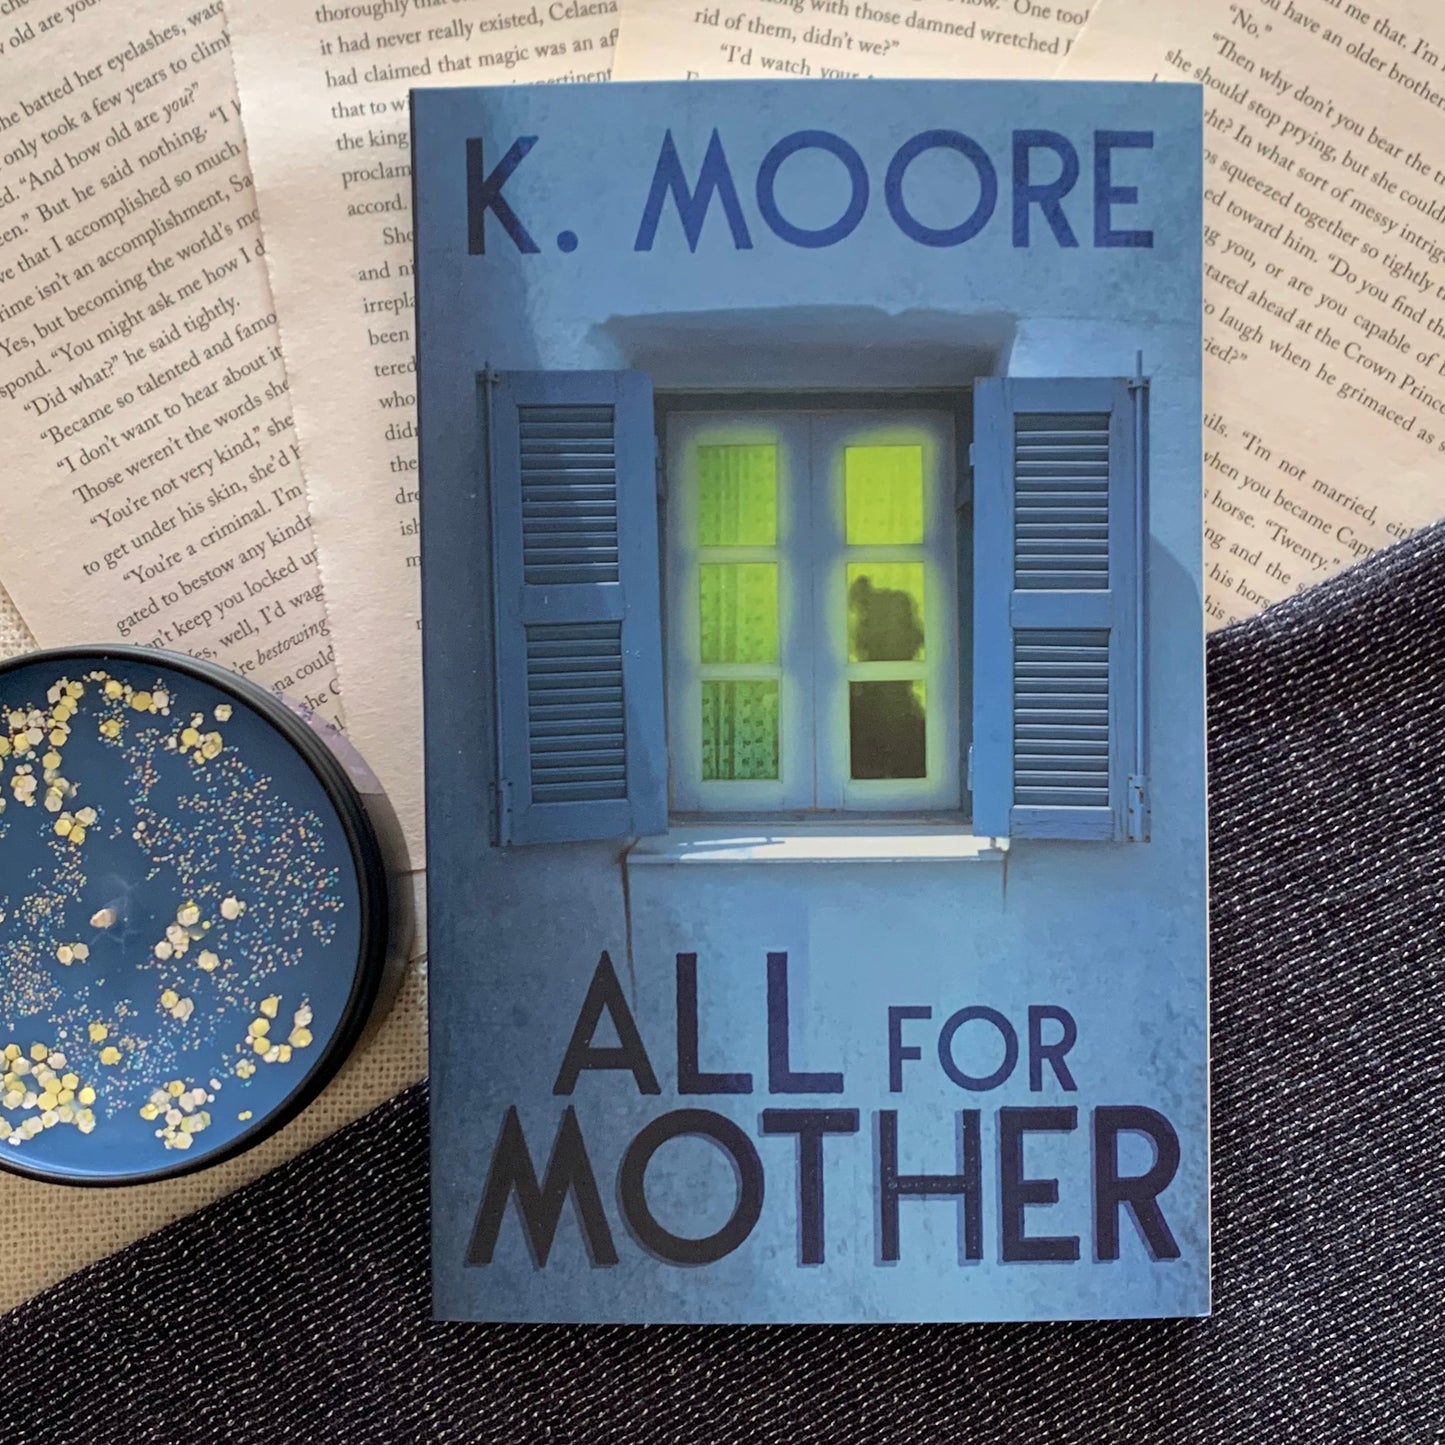 All for Mother by K. Moore